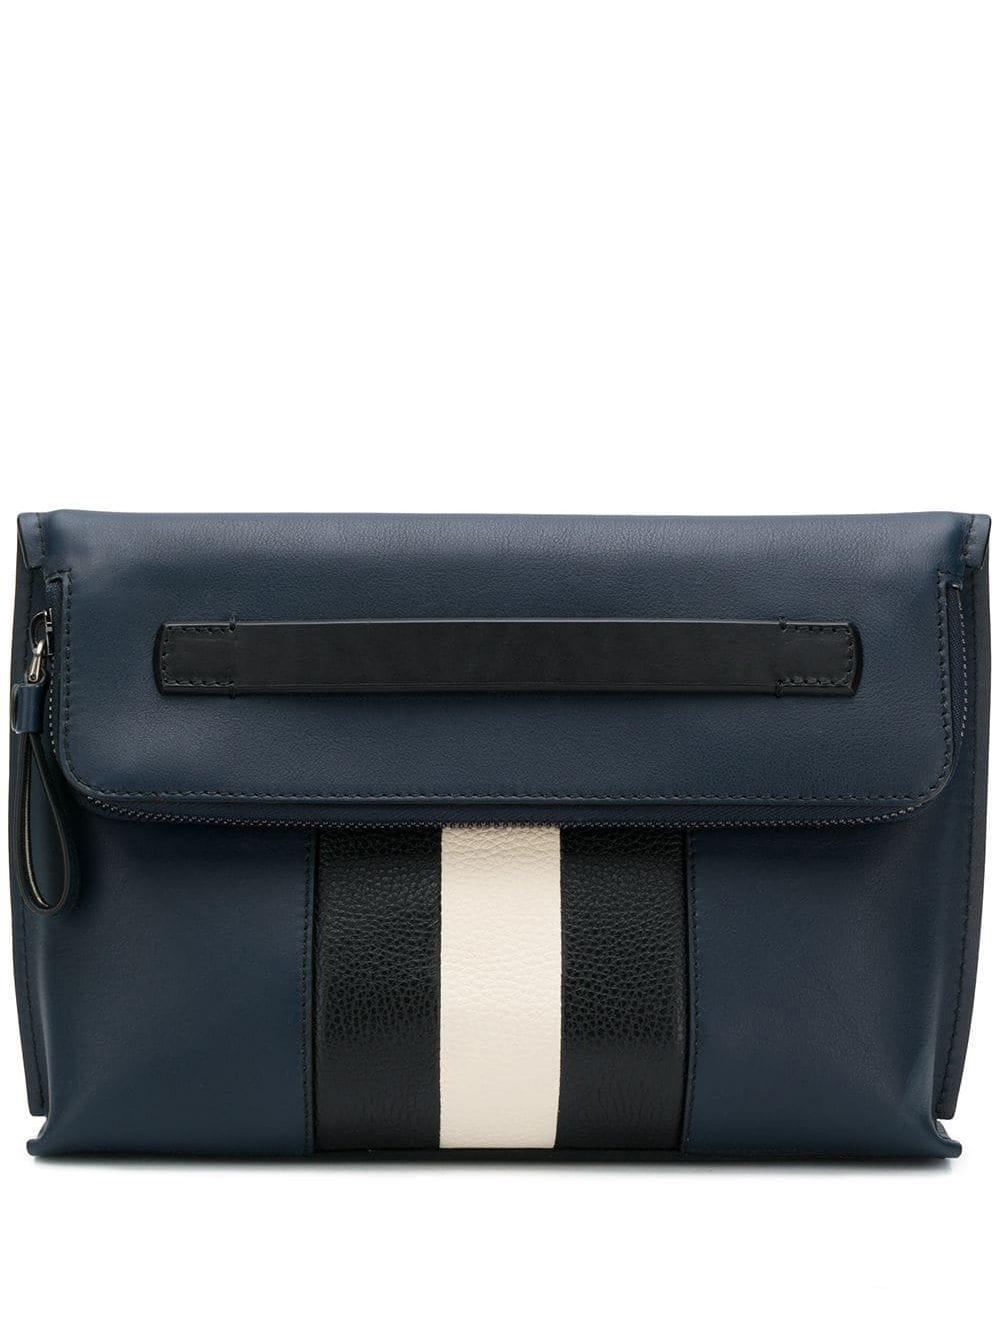 Bally Leather Striped Clutch Bag in Blue for Men - Lyst